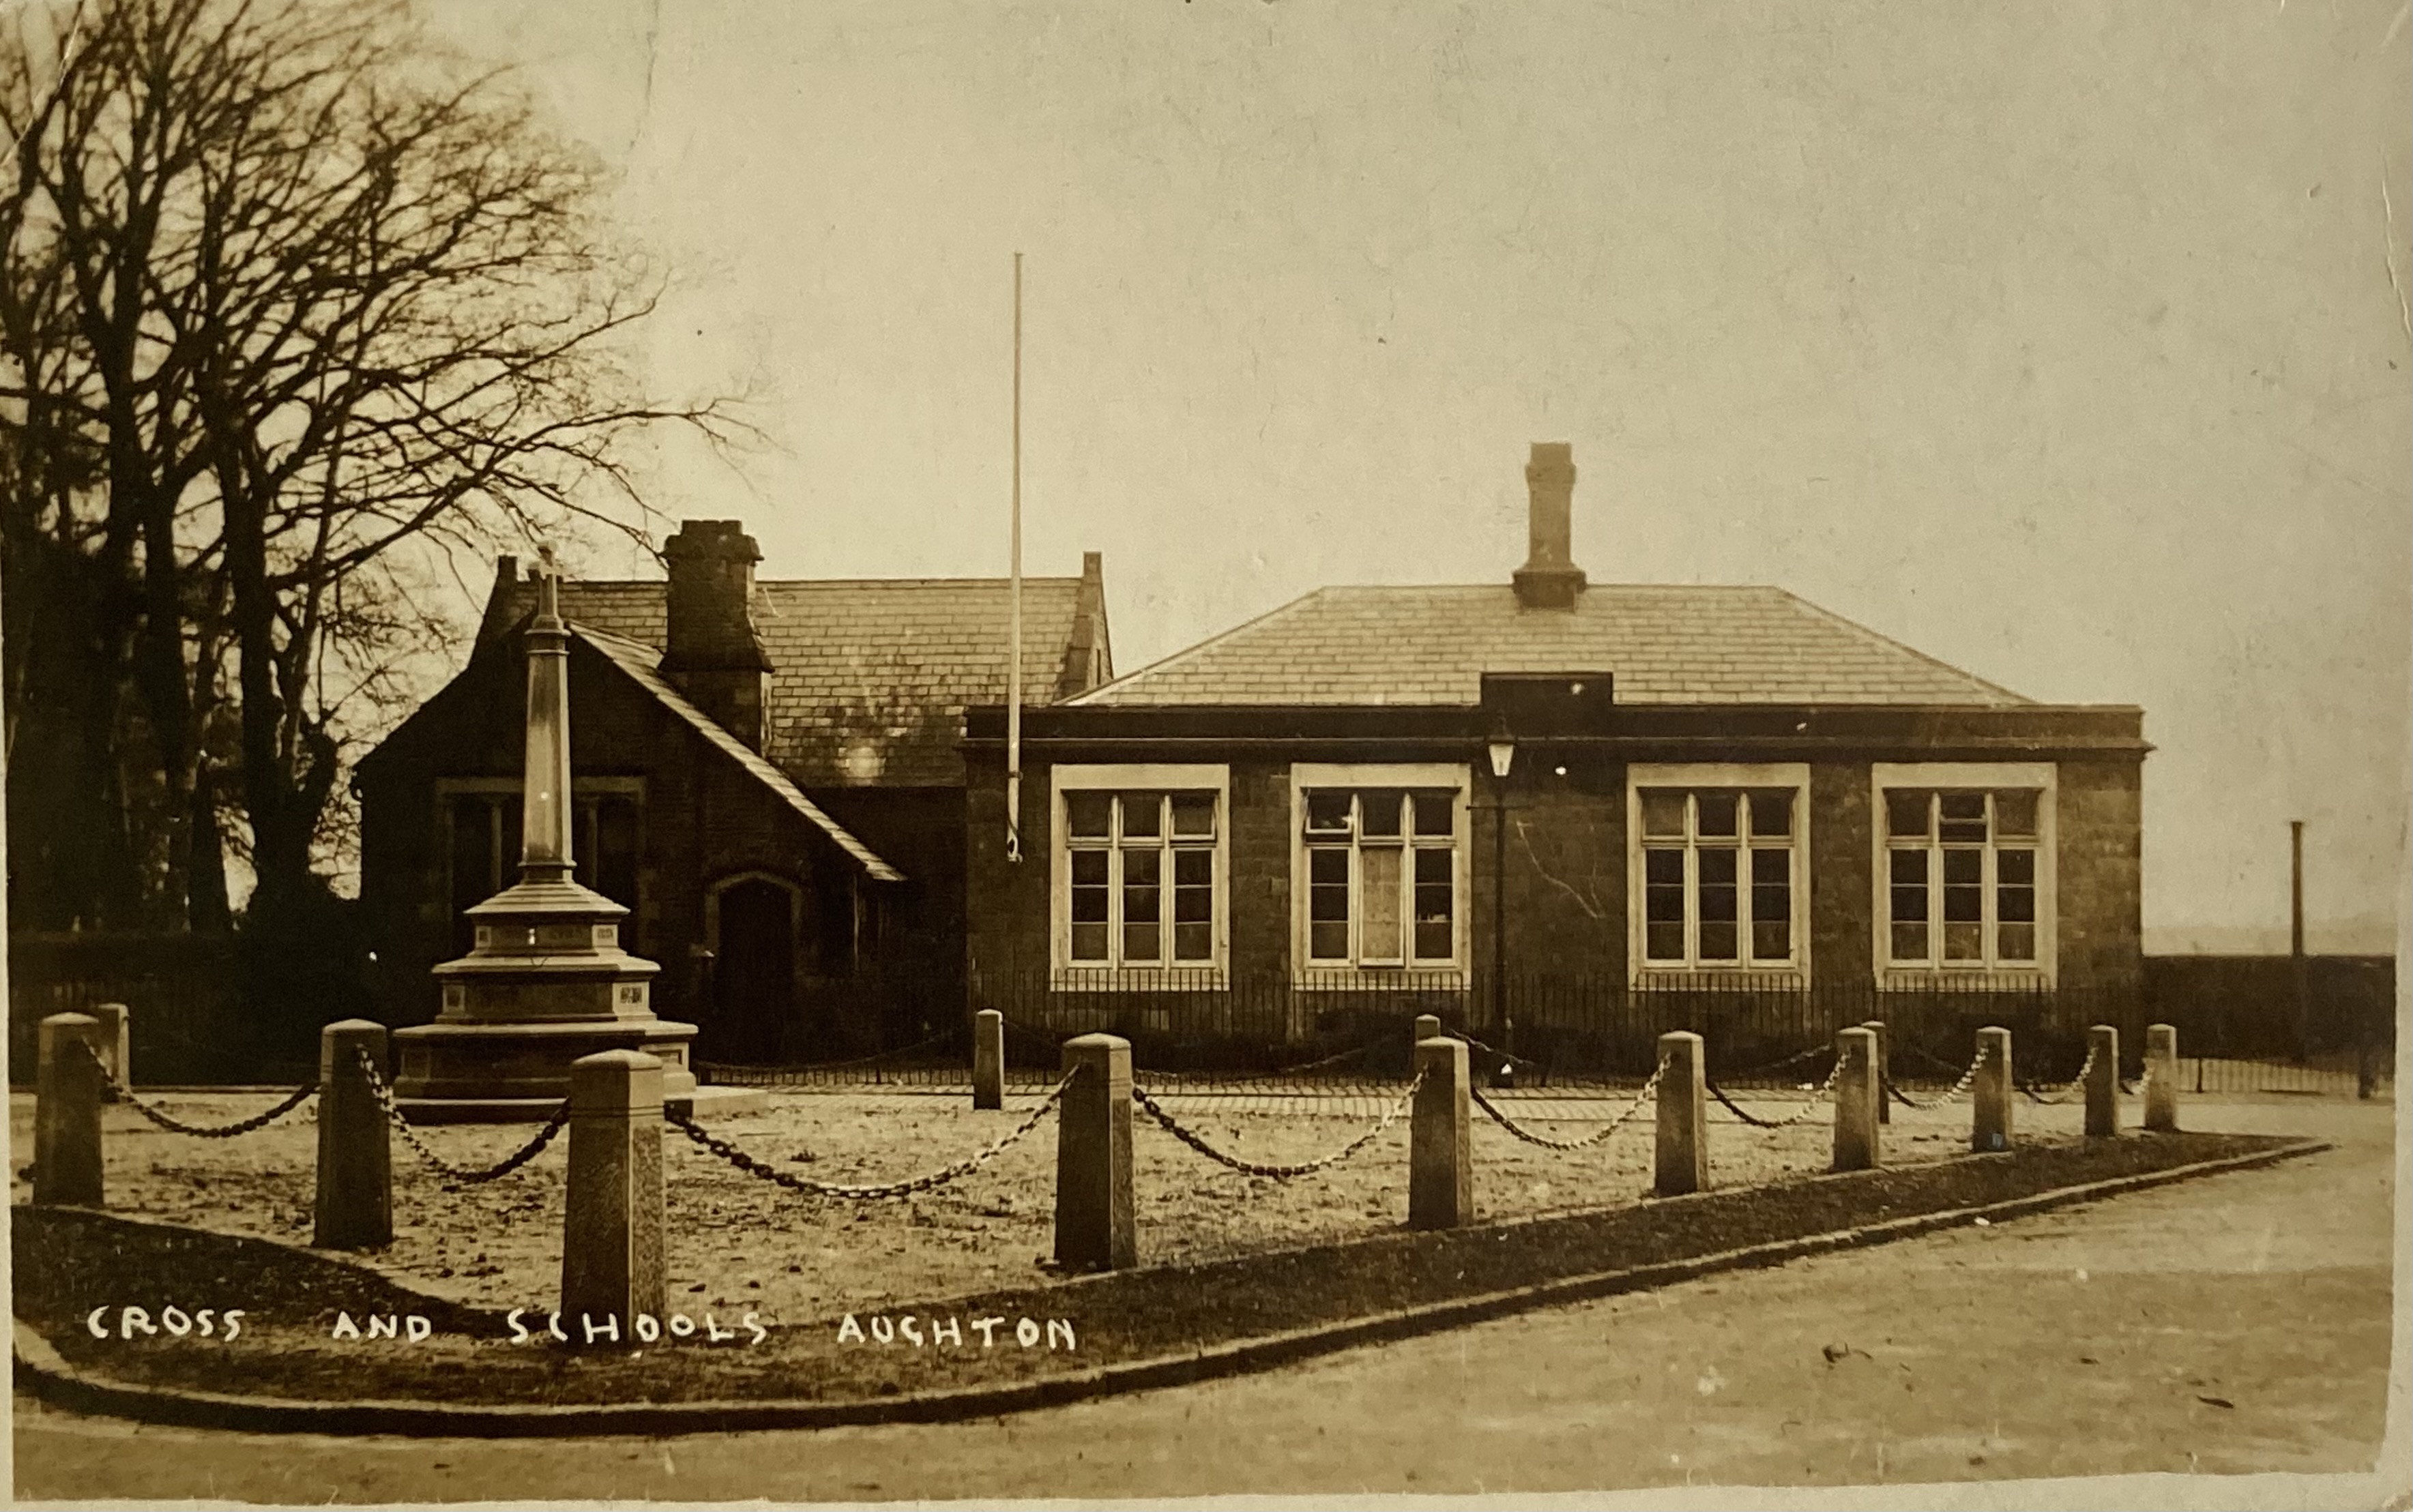 Cross and schools Aughton. Posted 1924